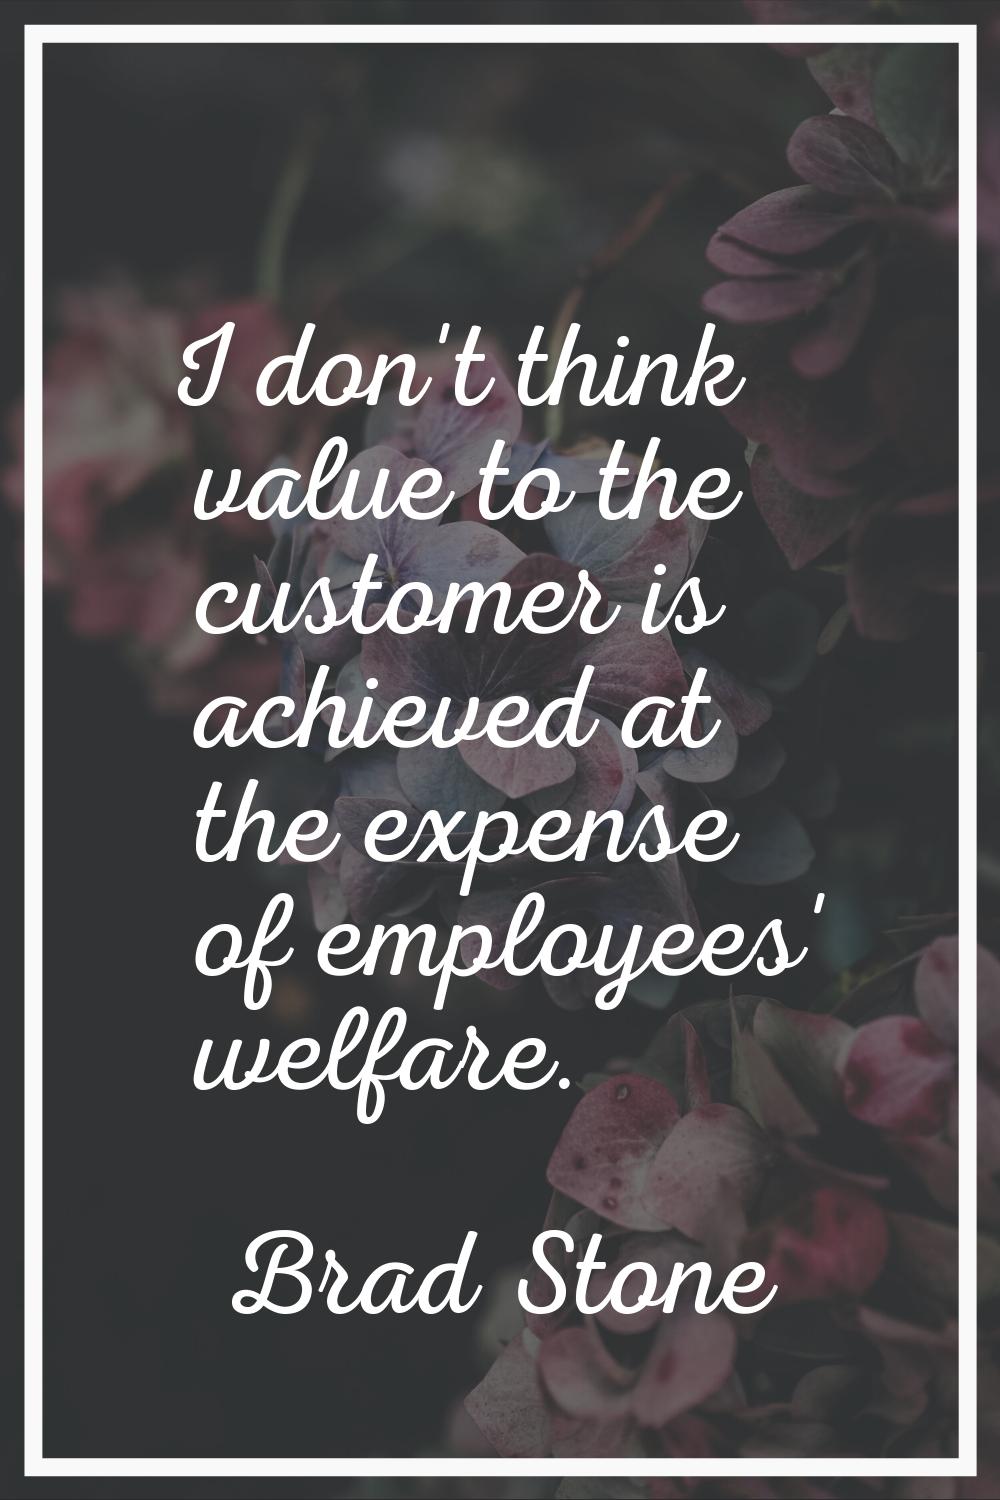 I don't think value to the customer is achieved at the expense of employees' welfare.